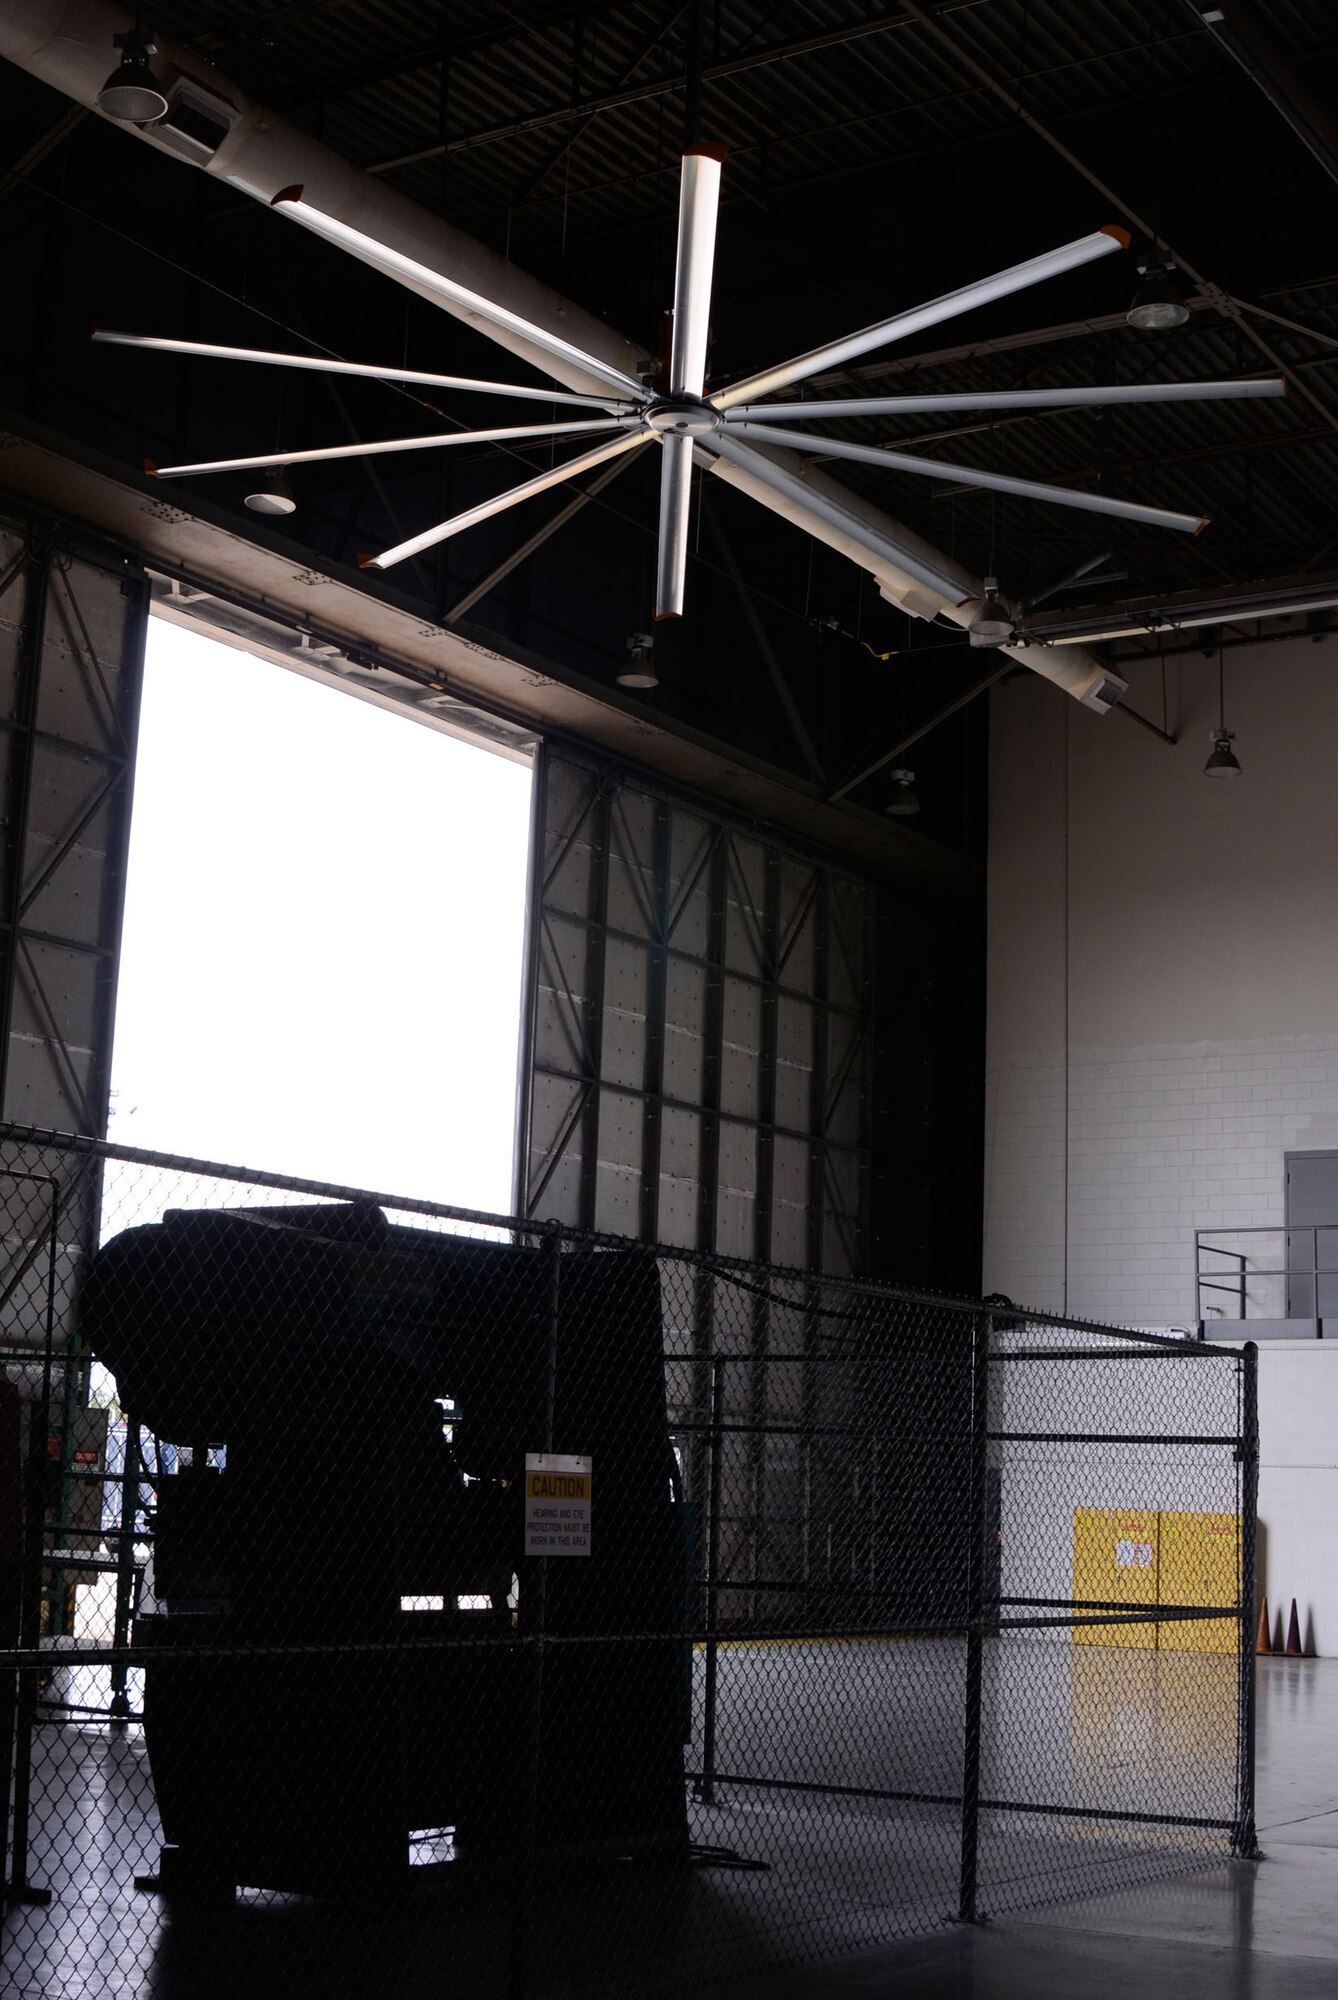 Members of the 94th Maintenance Squadron experience a climate controlled environment due to large fans installed in aircraft maintenance bays 2 and 3 in building 838 here Oct. 27. (U.S. Air Force photo/Don Peek)